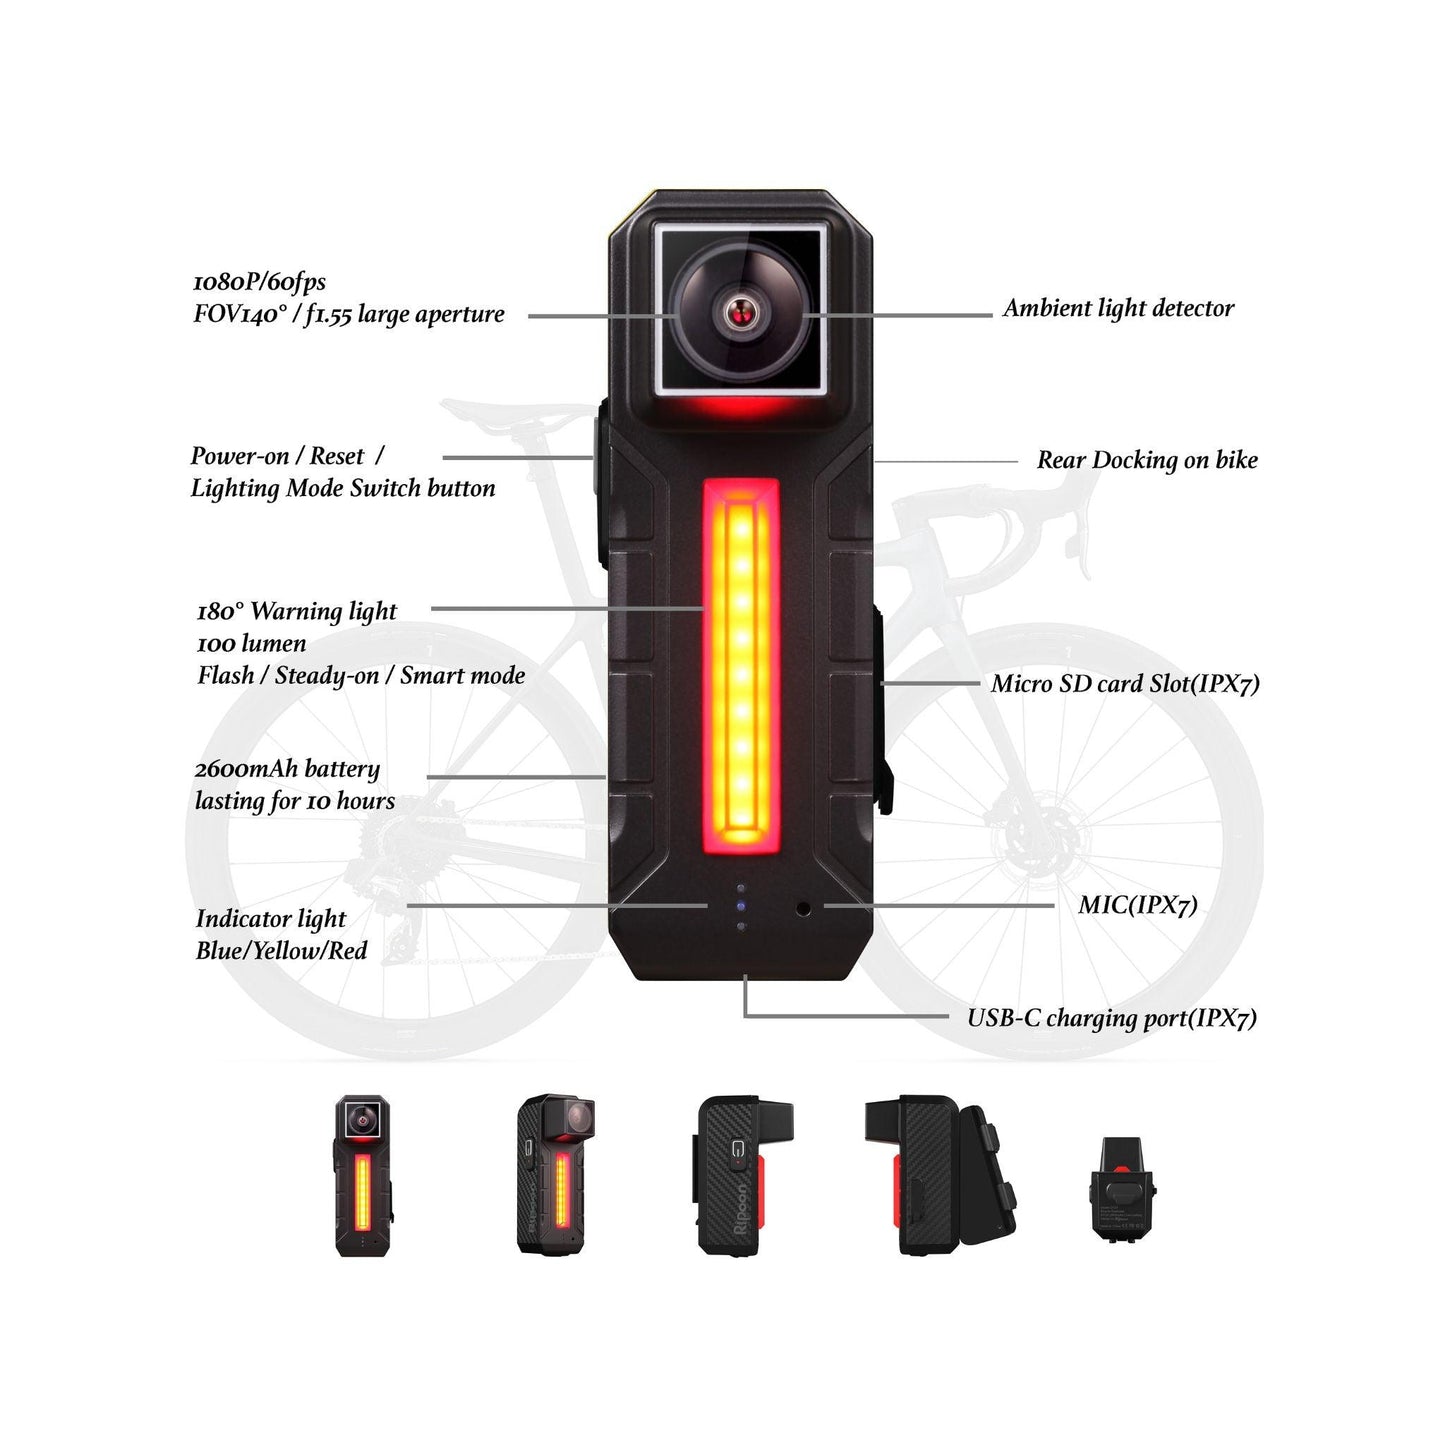 Bikers.SG Ripoon Q100 Bike Safety Camera and Light - Bikers.SG